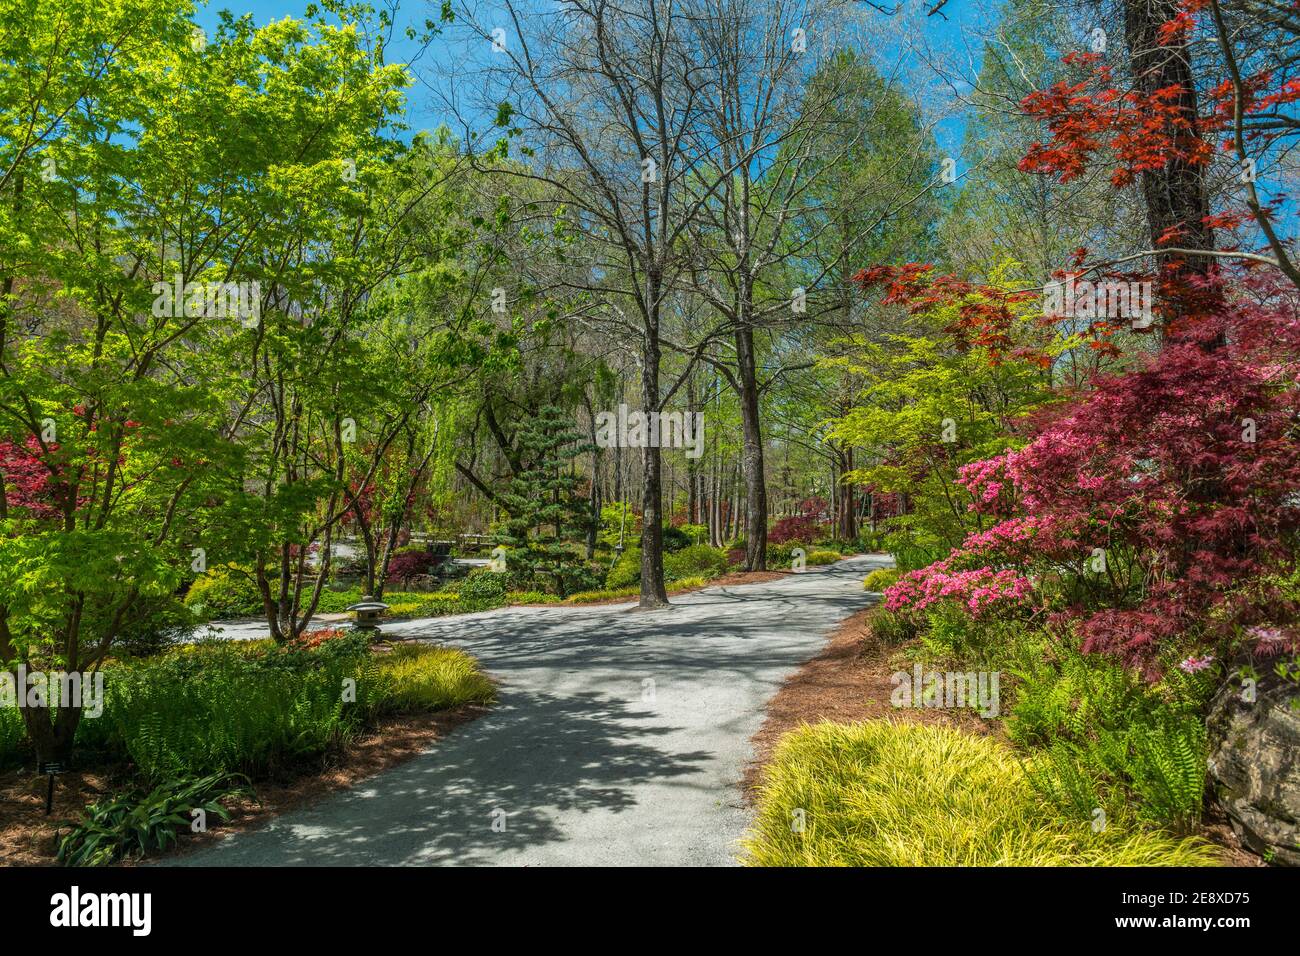 Going down a path through the gardens in early spring with the vibrant colors of the foliage emerging on the variety of trees and the azalea bushes fl Stock Photo